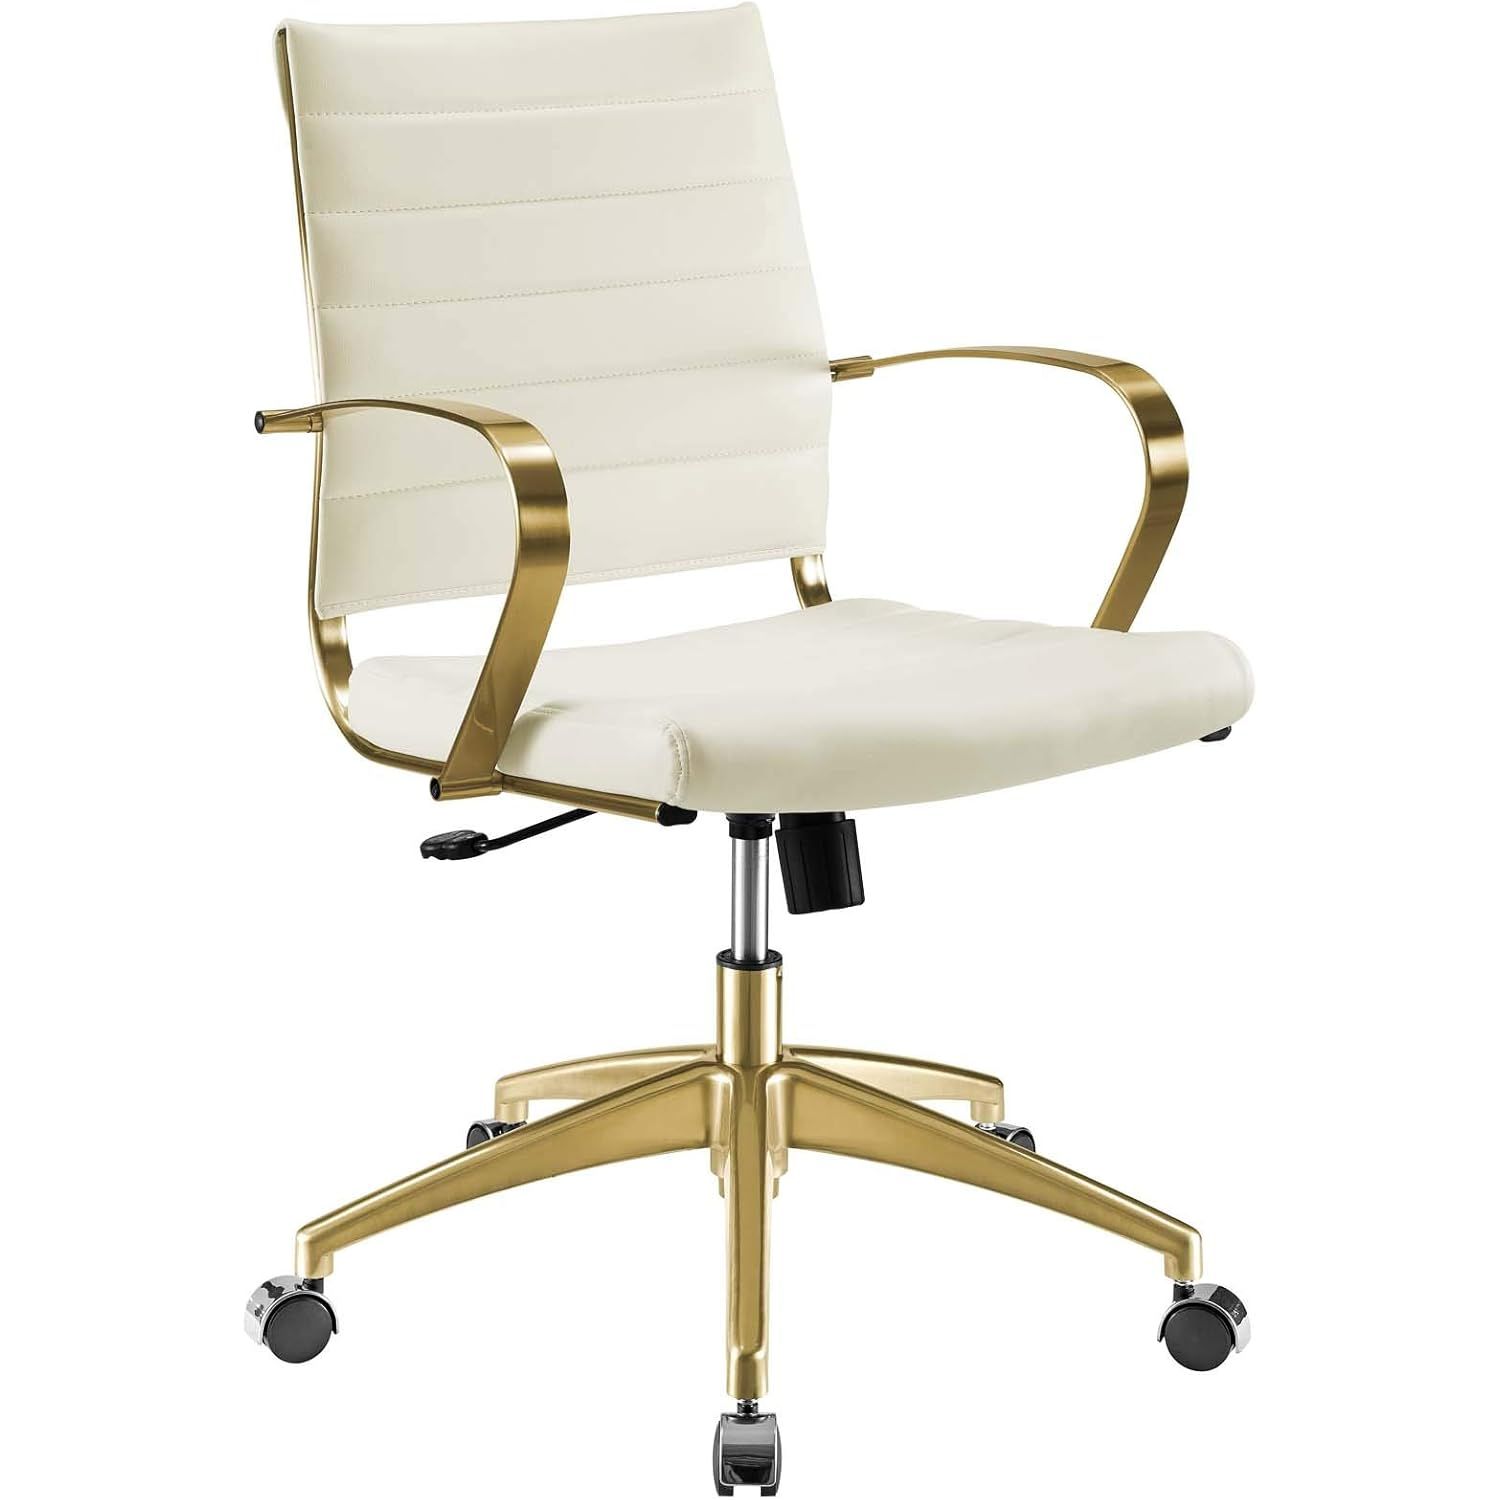 Modway Jive Gold Stainless Steel Executive Managerial Swivel Midback Office Chair | Amazon (US)